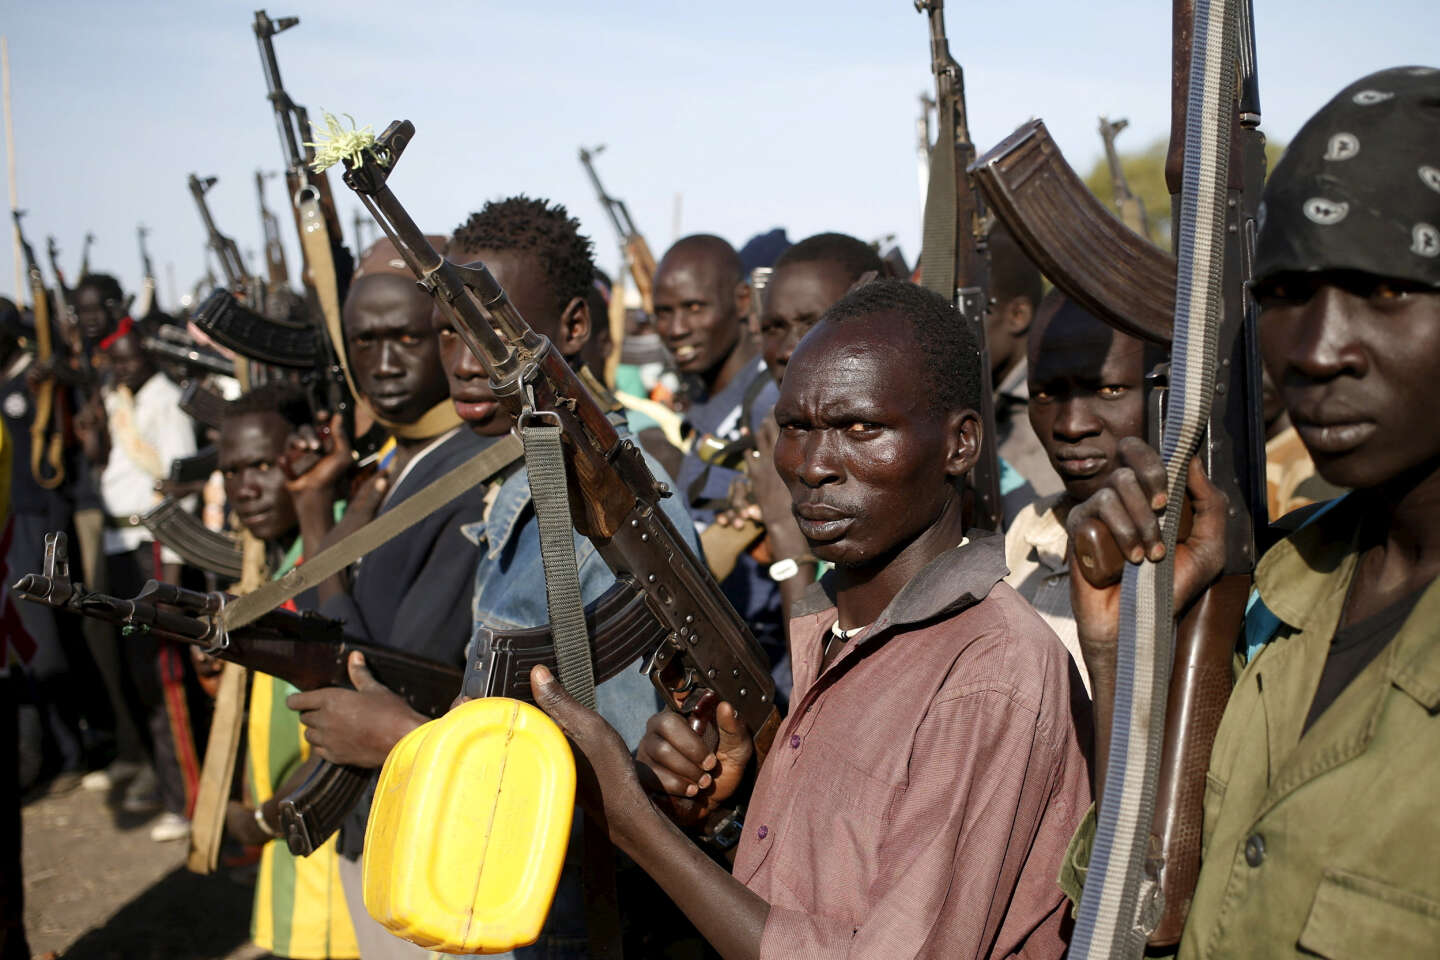 In South Sudan, the peace agreement undermined by the continuation of intercommunal conflicts